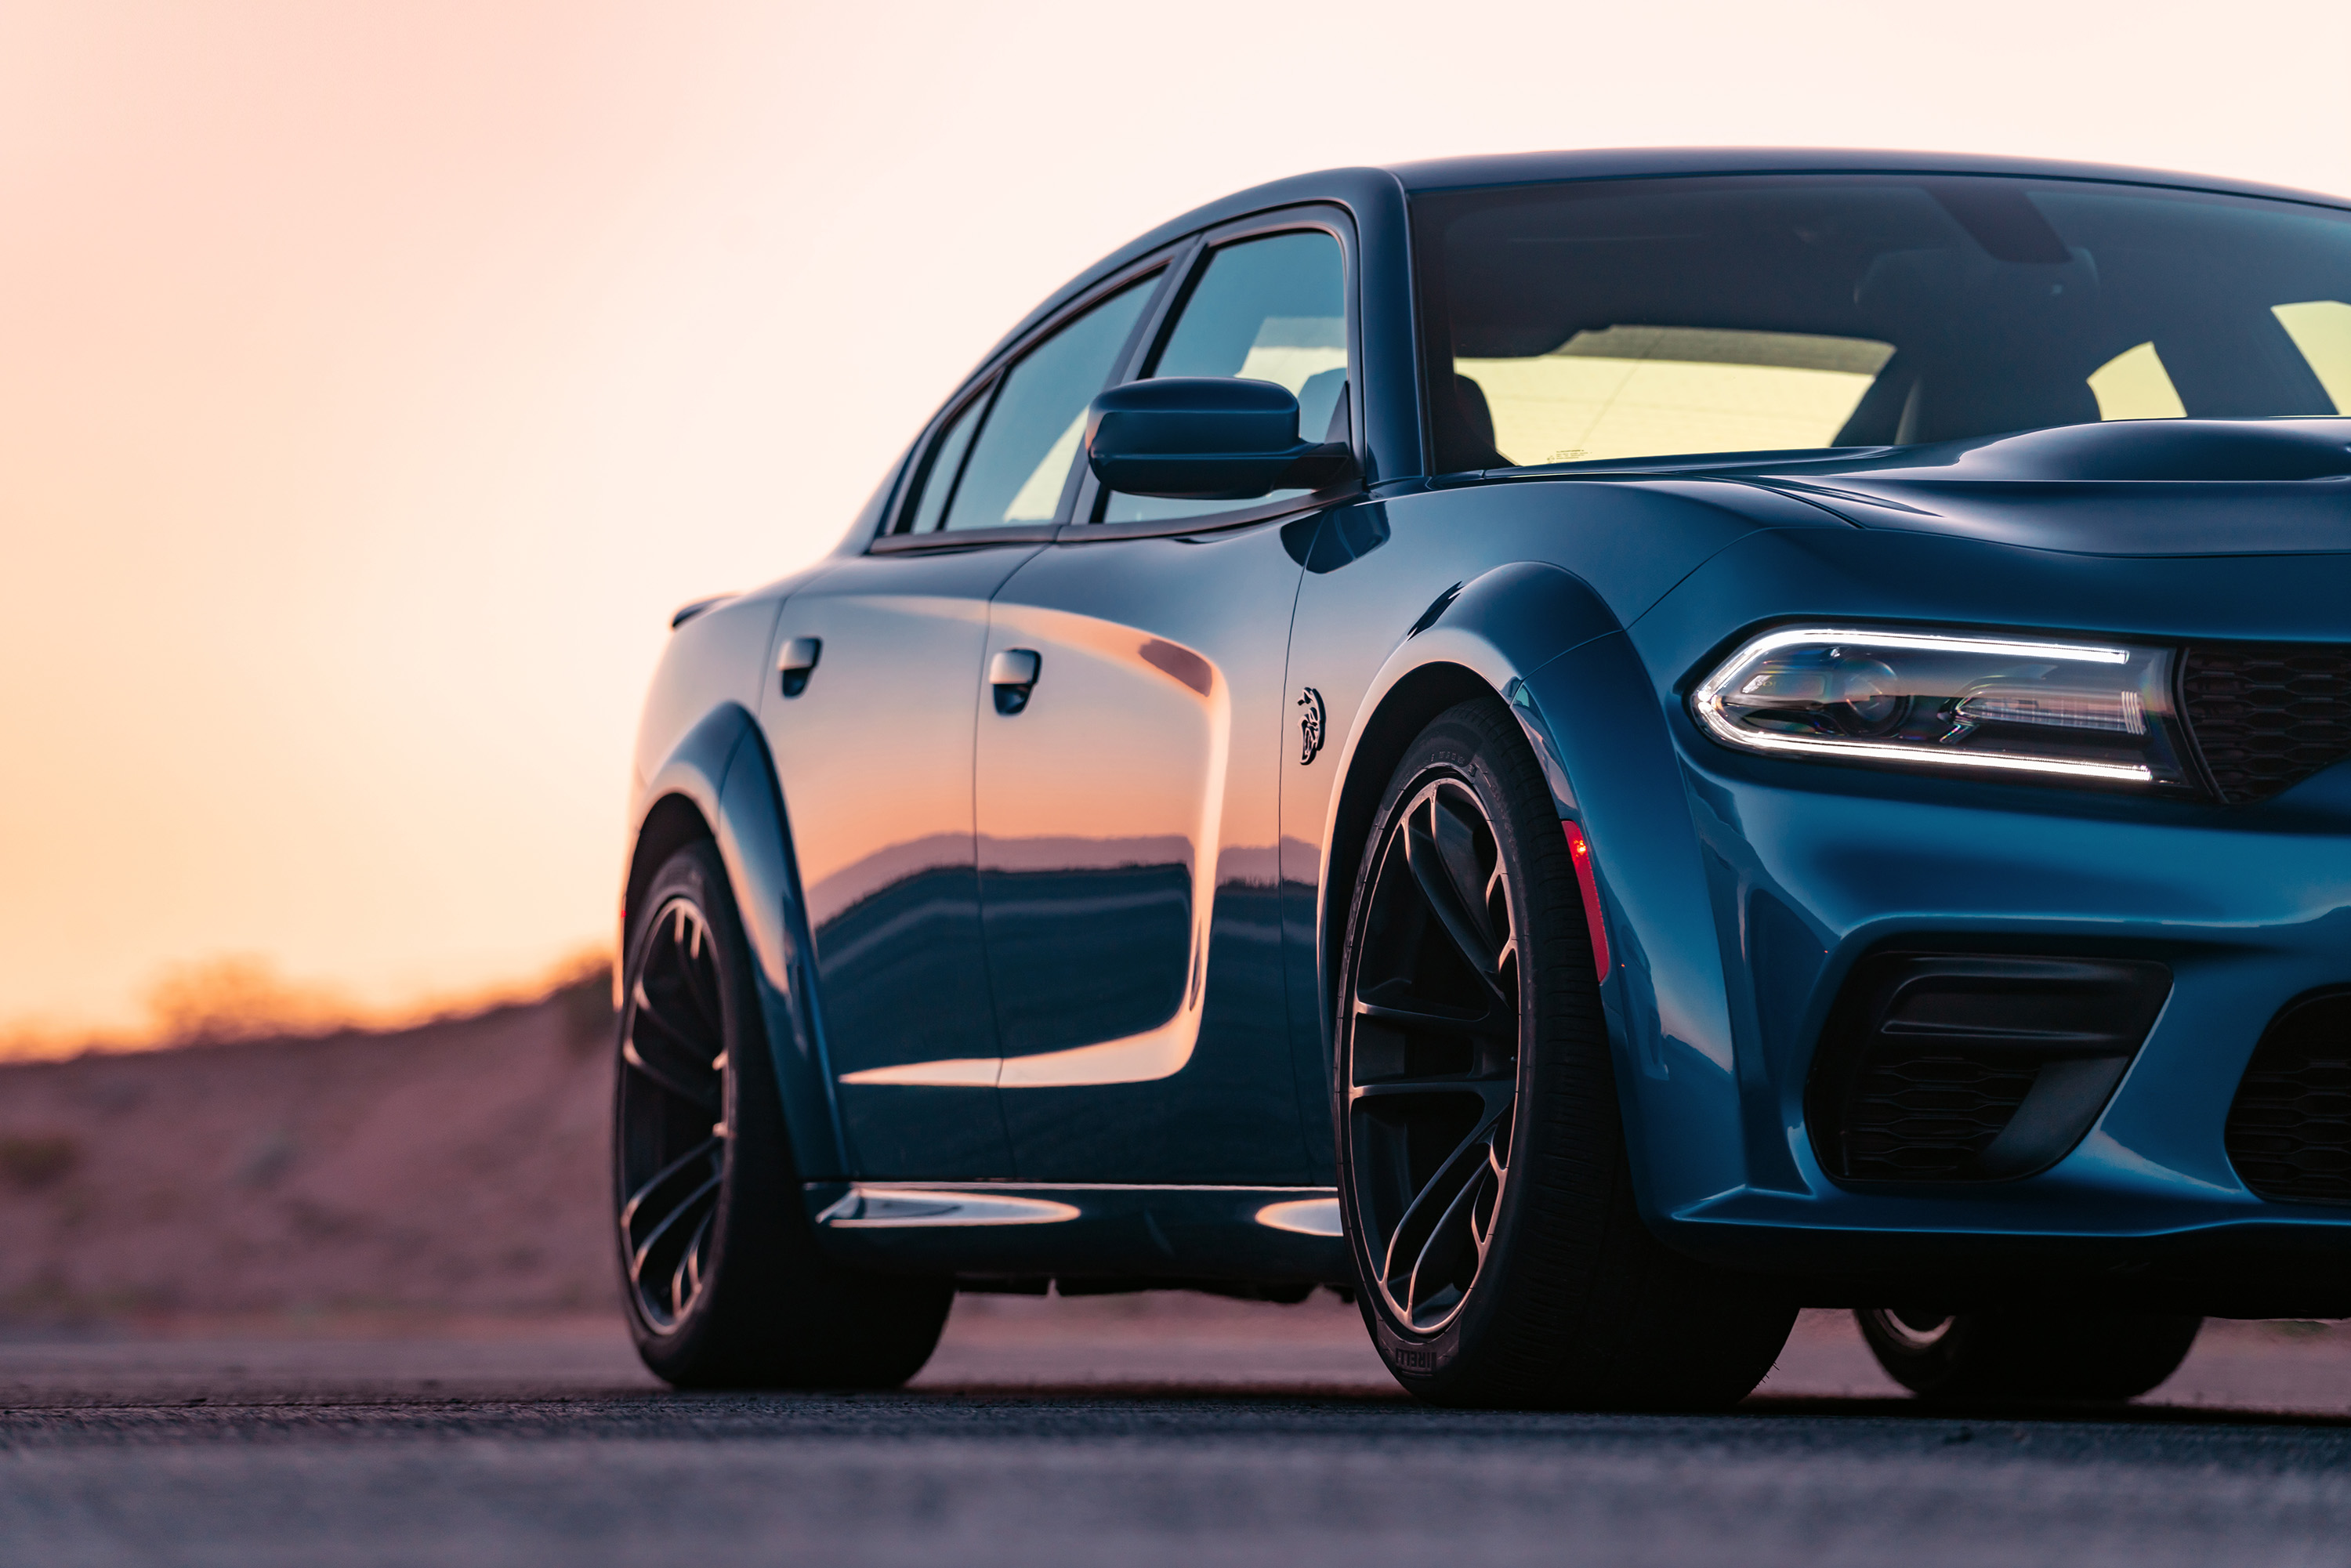 The Charger SRT Hellcat widebody is the most powerful.